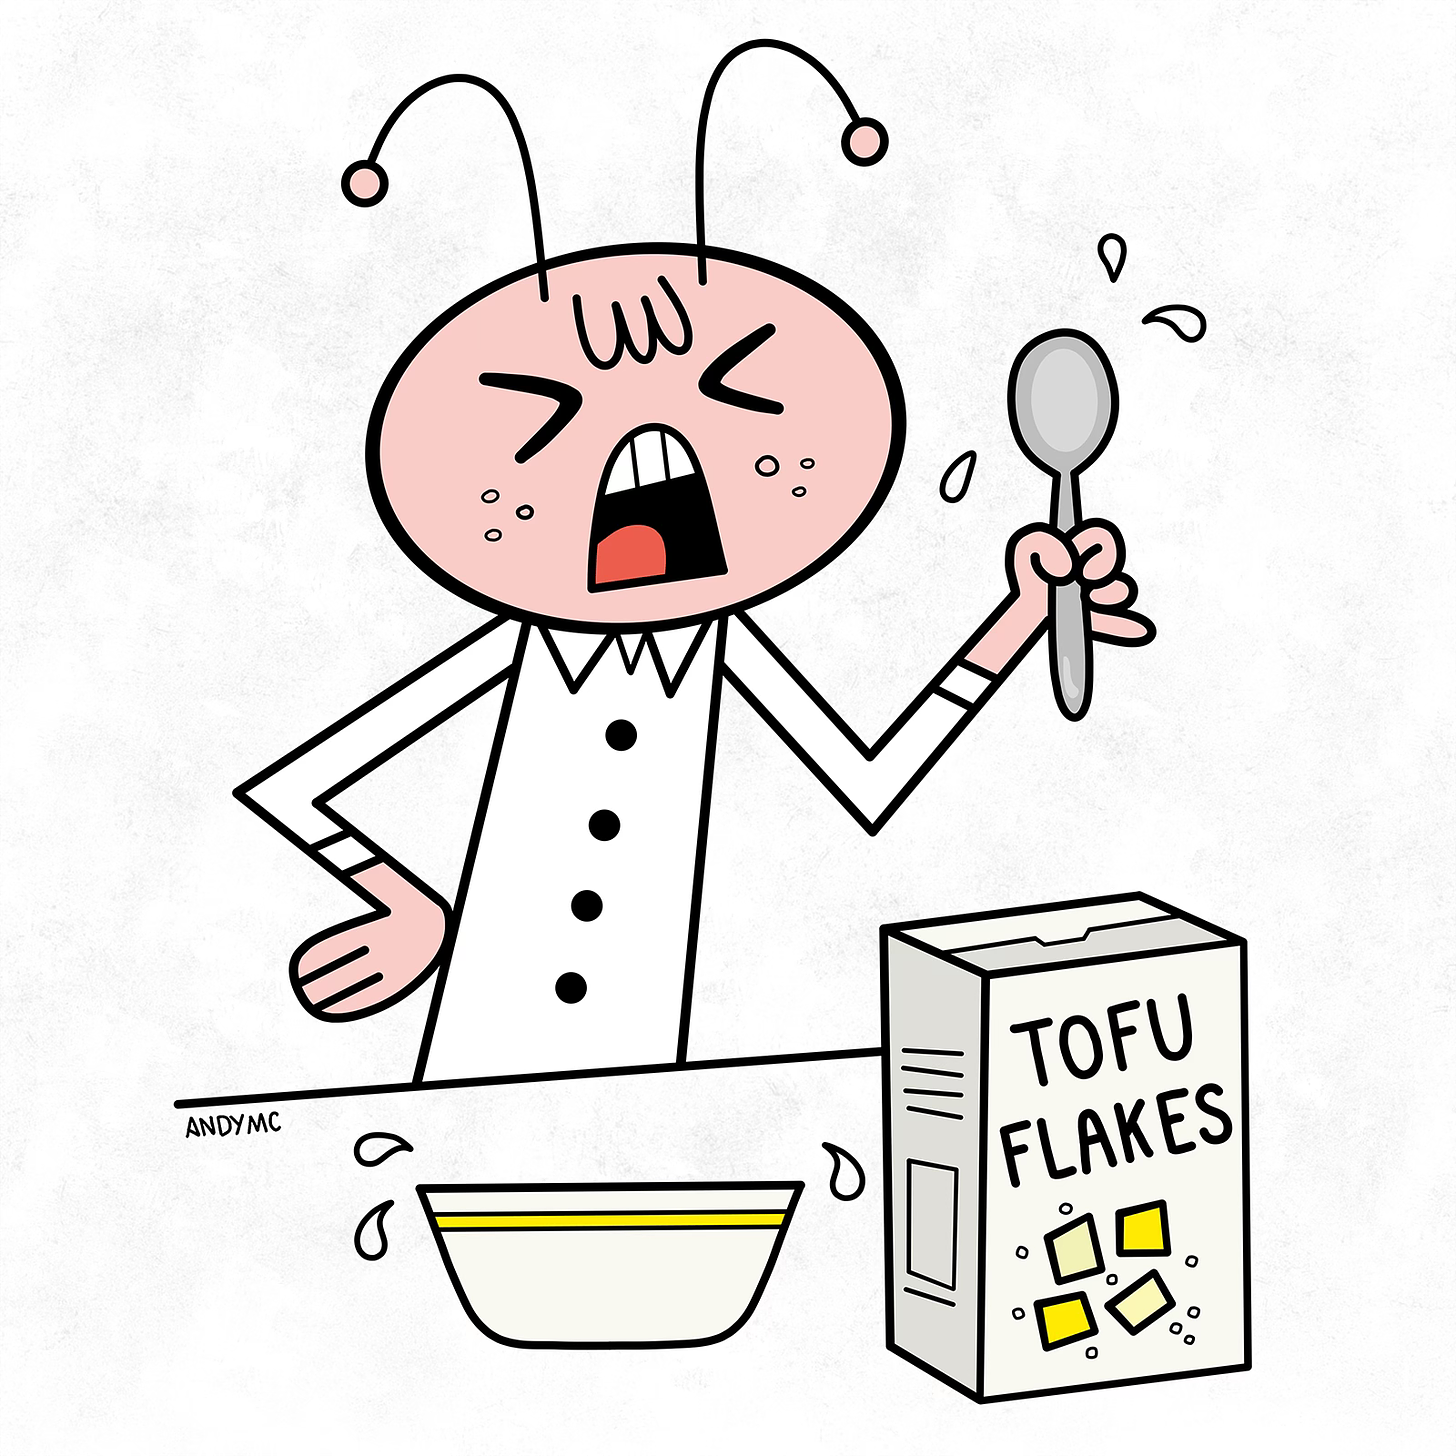 An illustration of an Ant eating a bowl of tofu flake cereal.